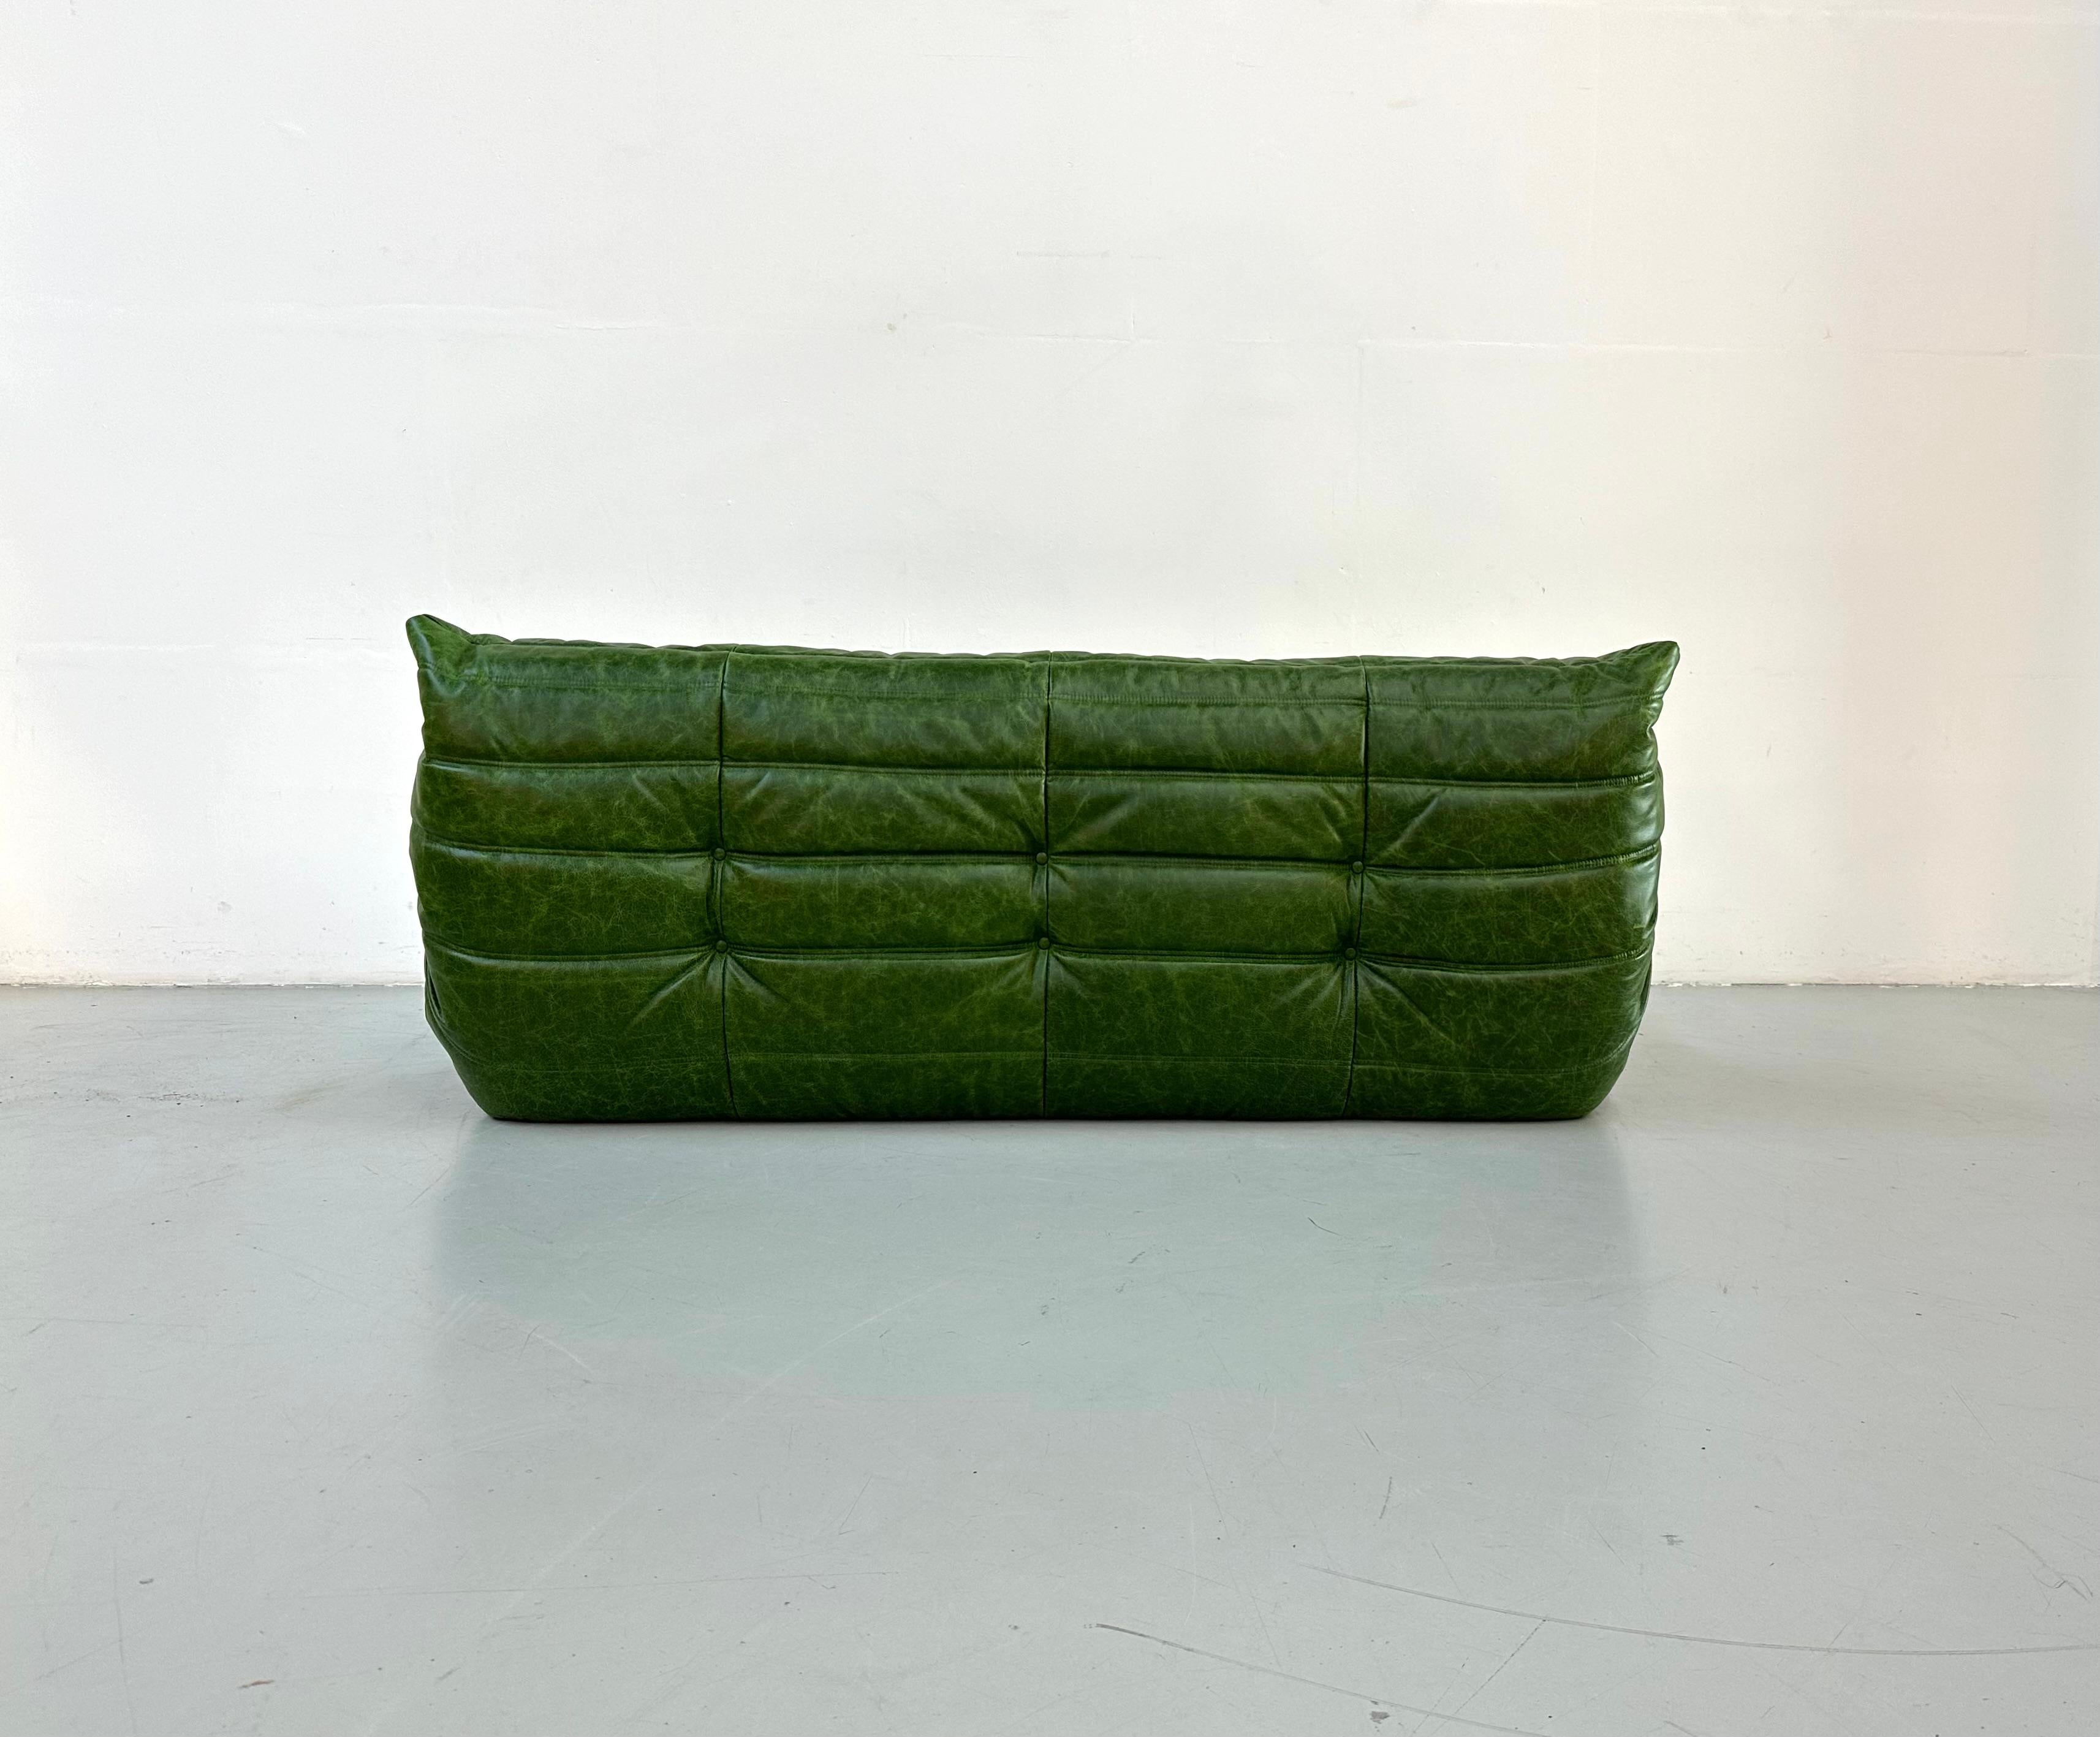 French Vintage Togo Sofa in Green Leather by Michel Ducaroy for Ligne Roset. 1